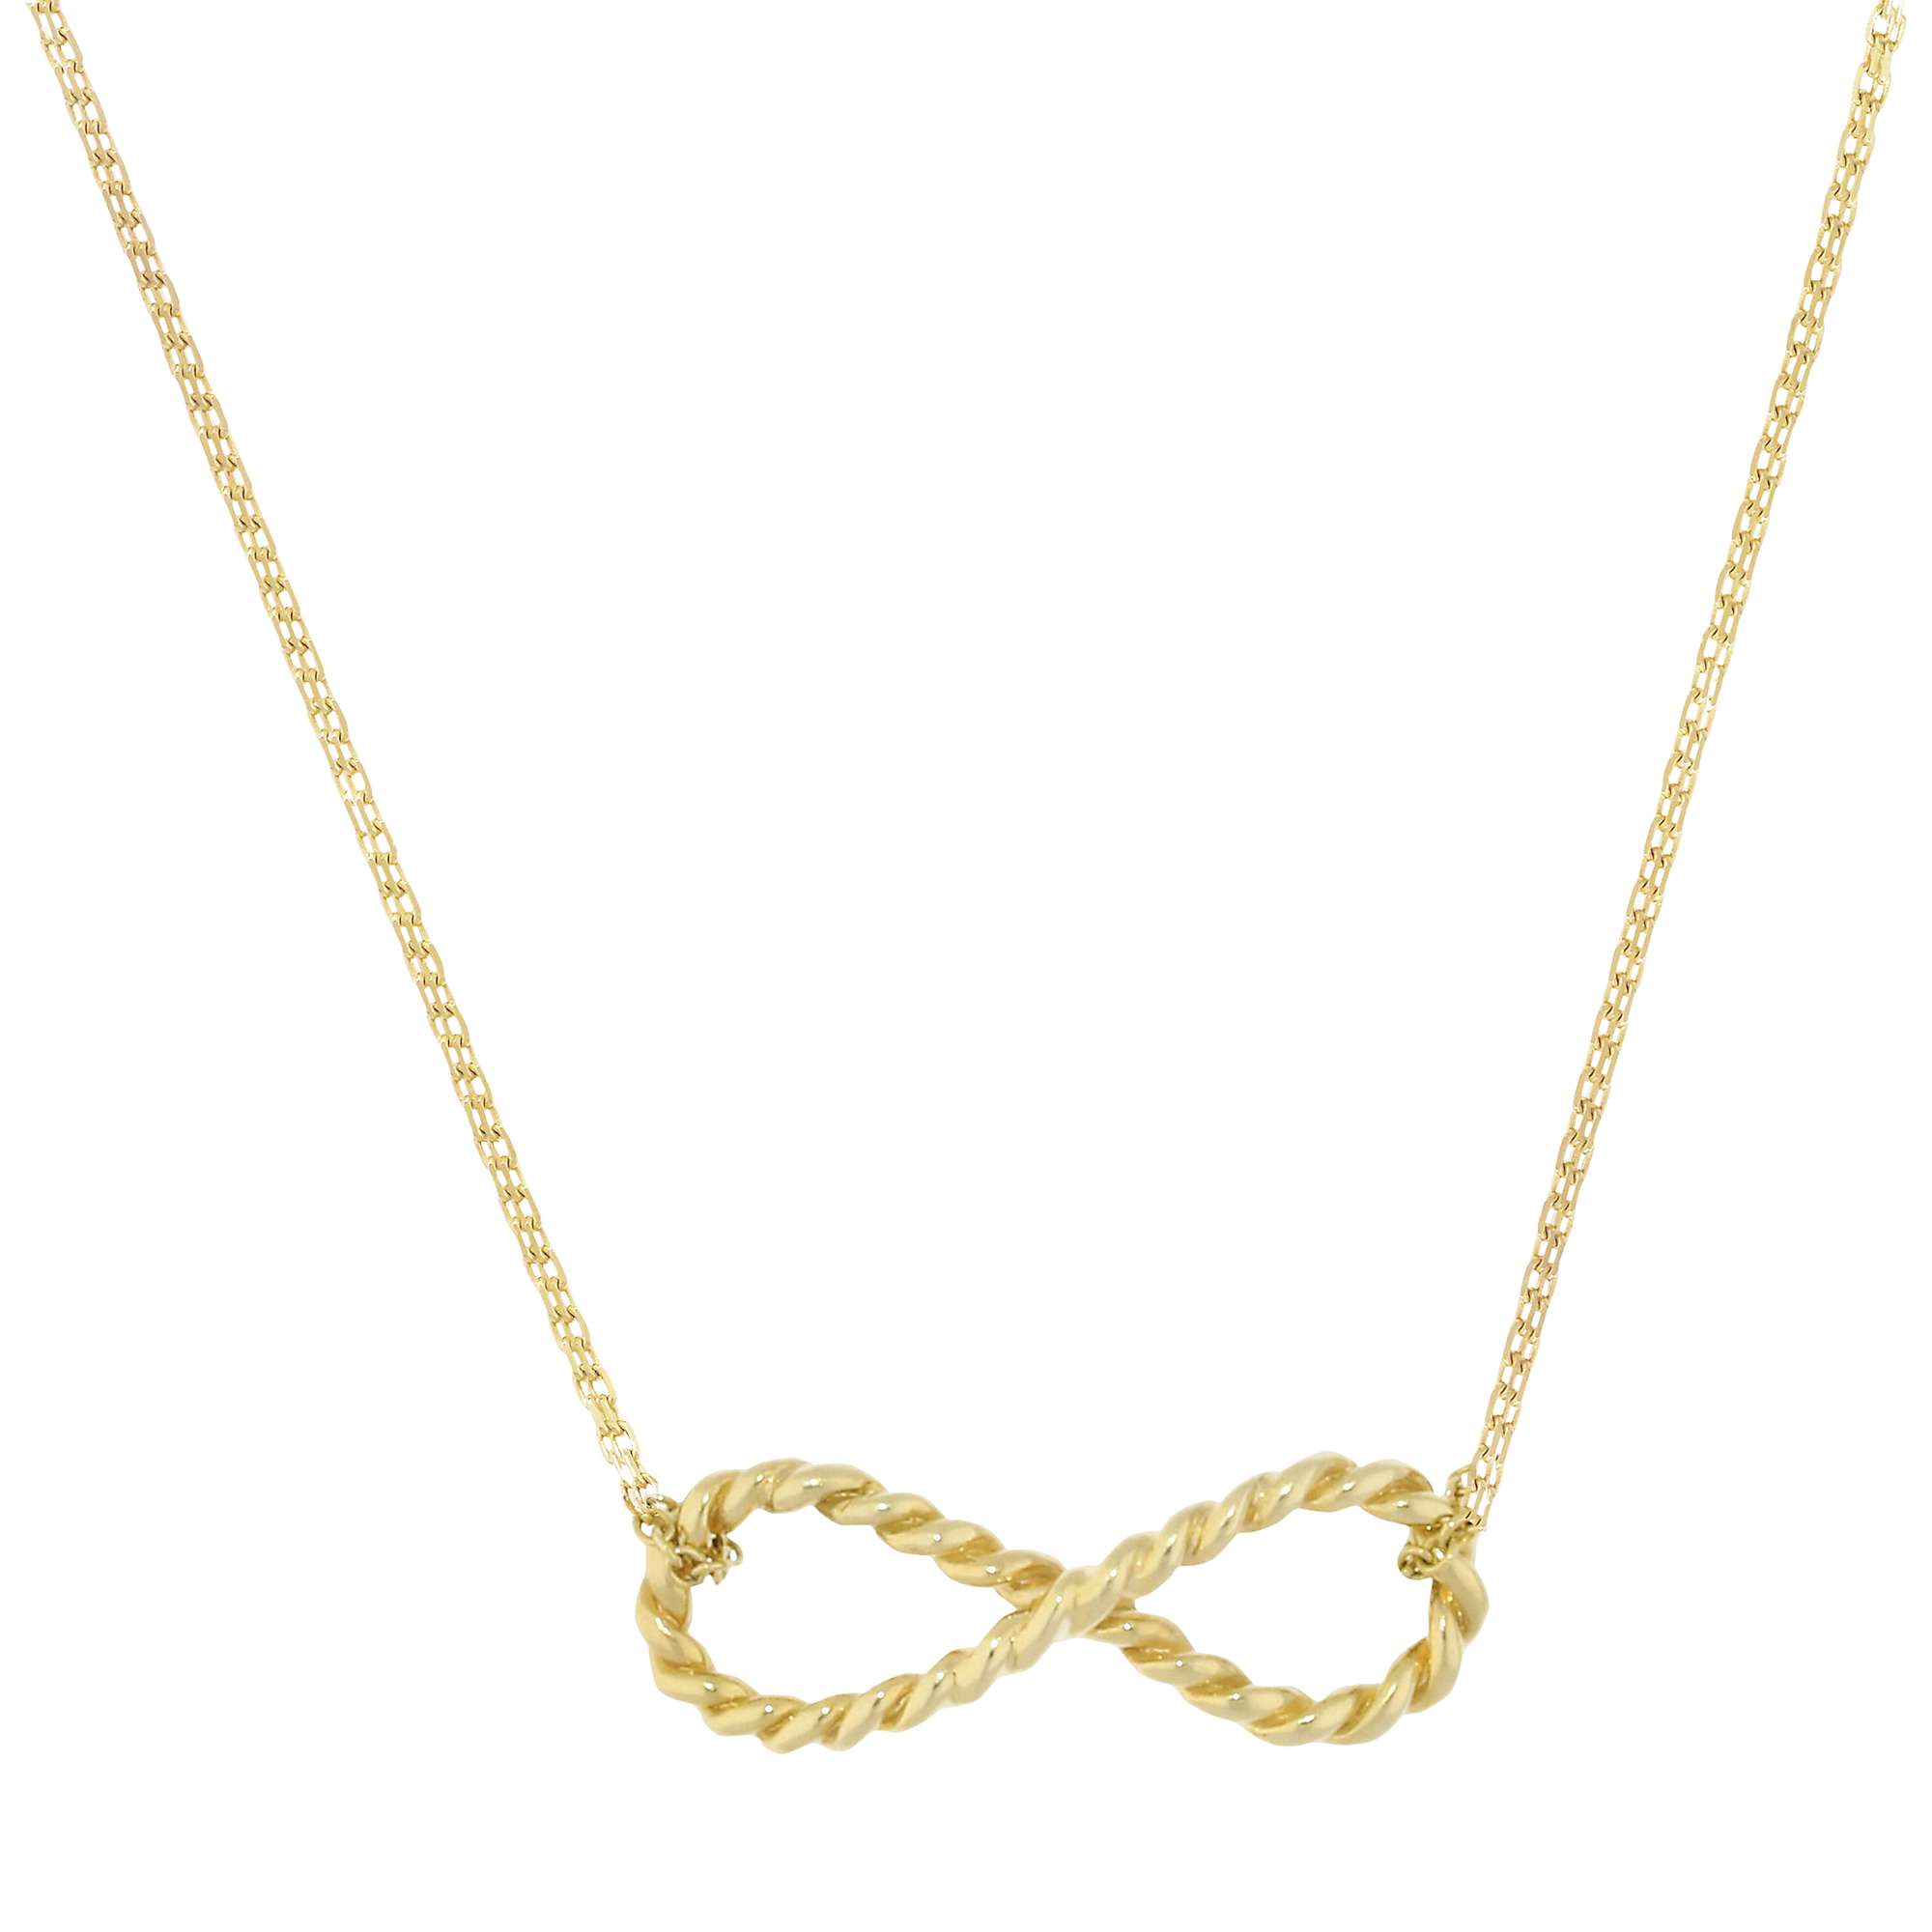 Buy London Road 9ct Yellow Gold Large Infinity Pendant, Gold Online at johnlewis.com